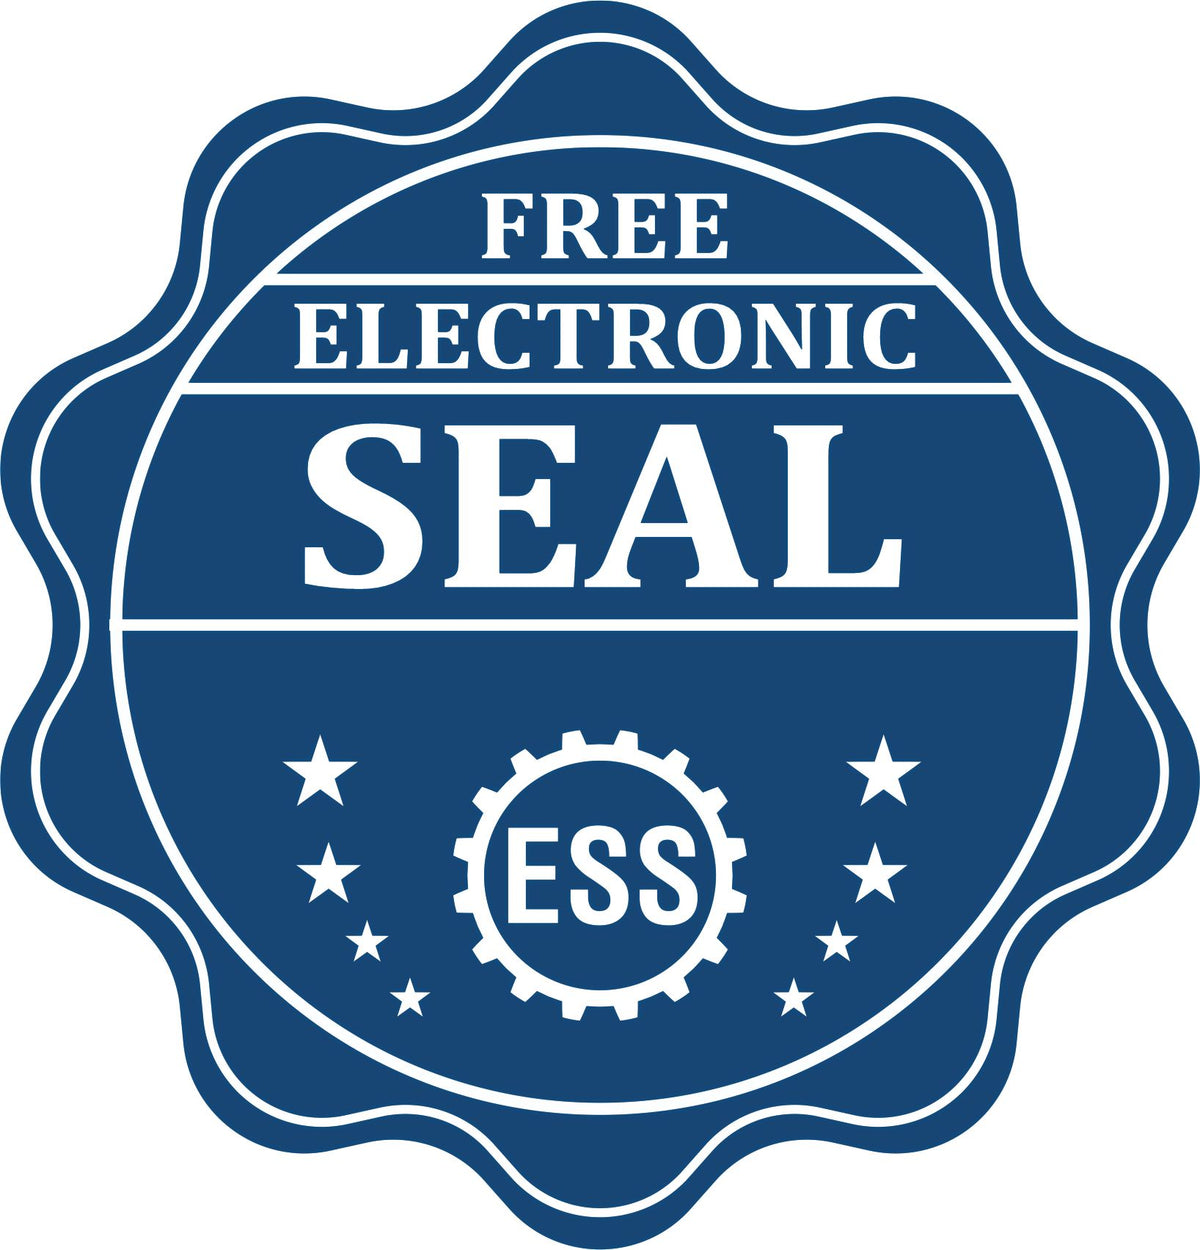 A badge showing a free electronic seal for the Heavy Duty Cast Iron Missouri Geologist Seal Embosser with stars and the ESS gear on the emblem.